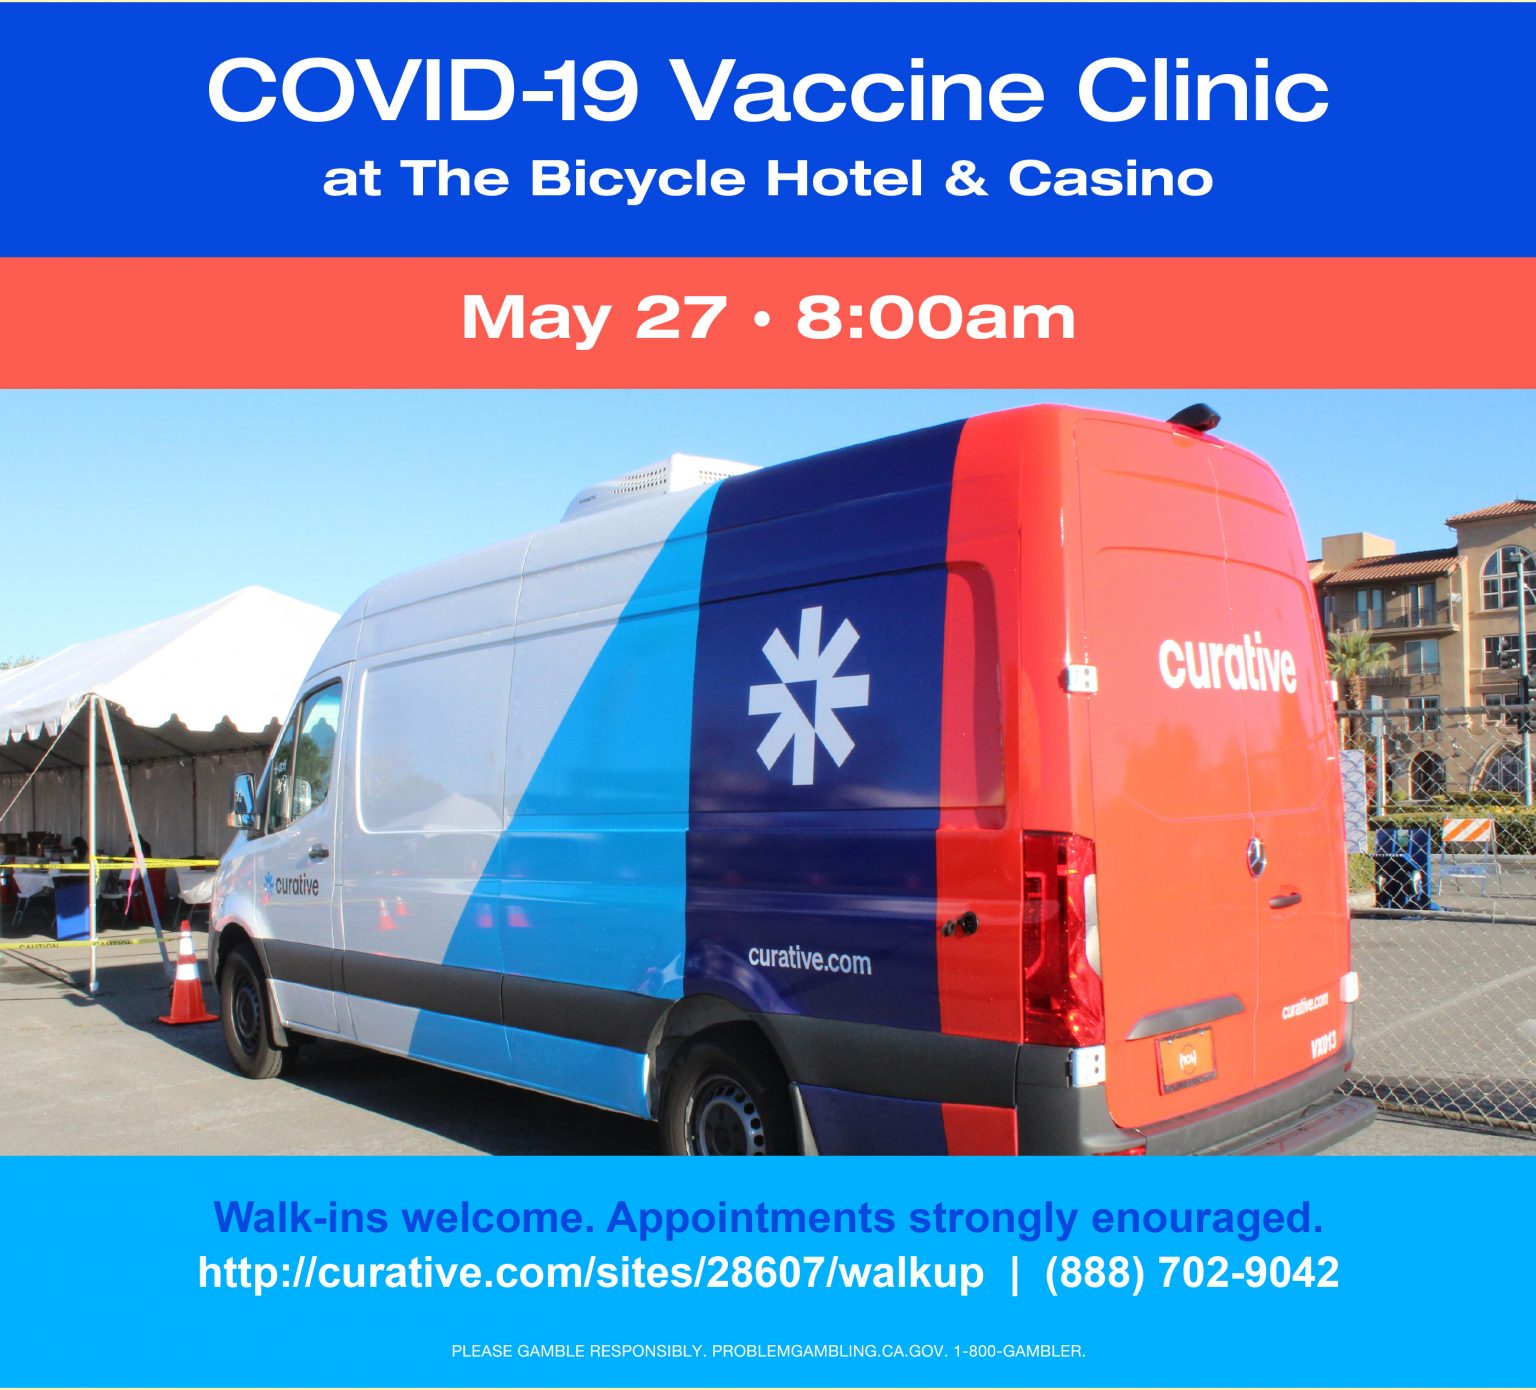 ‘The Bike’ in Los Angeles to Serve as COVID-19 Vaccination Site